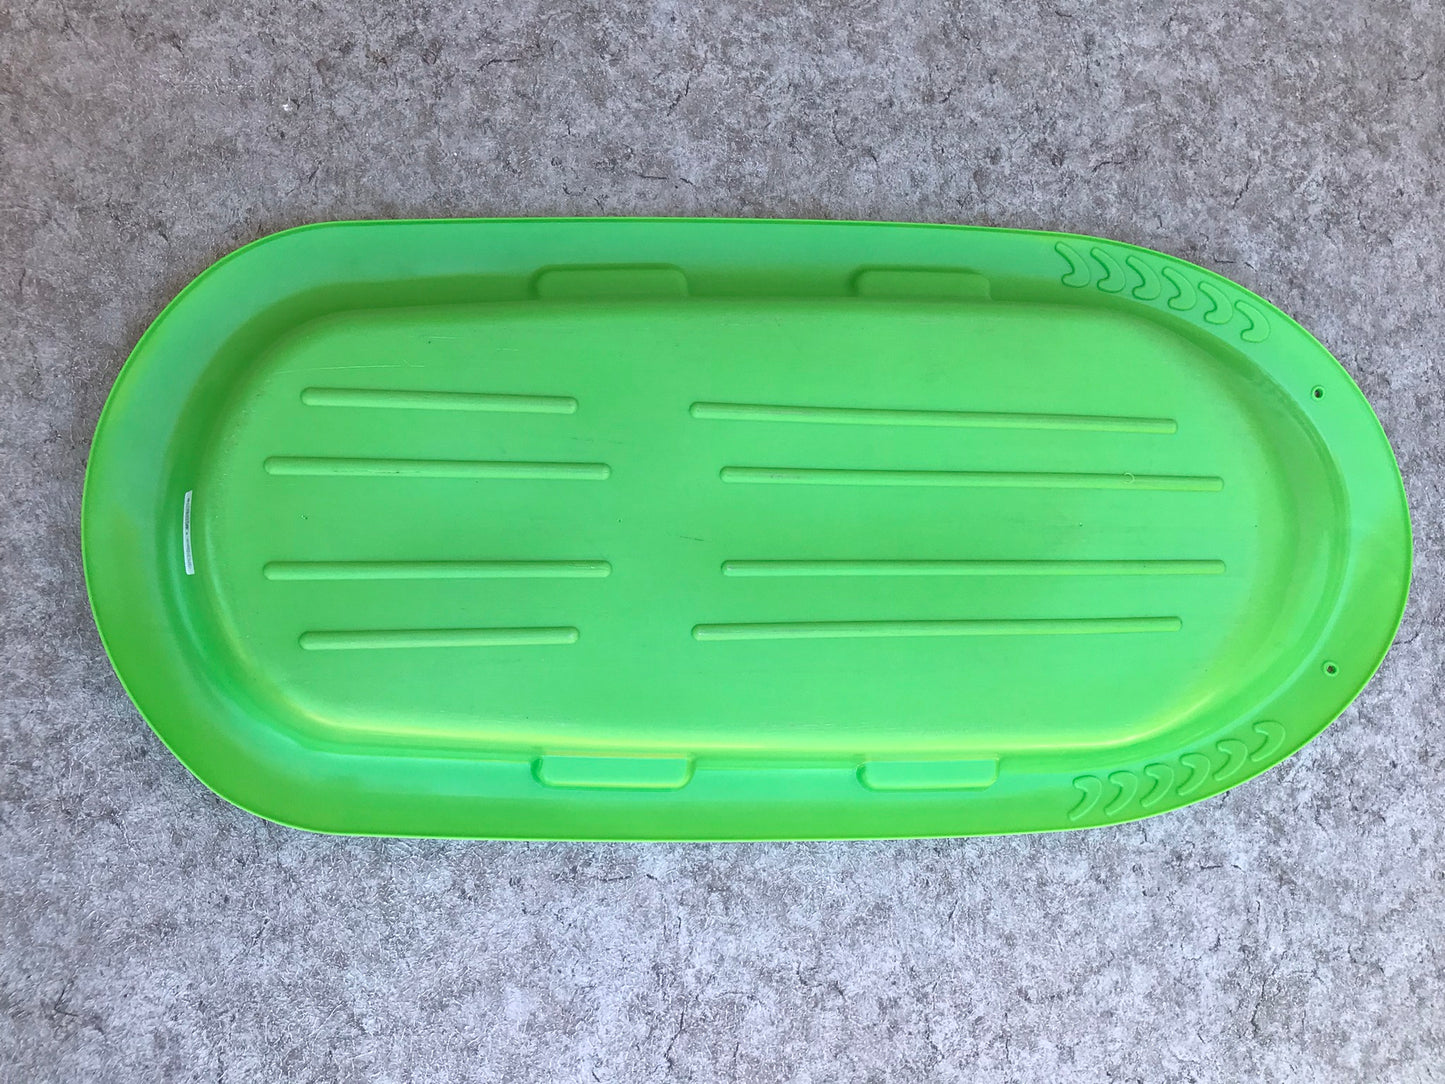 Snow Sled Taboggan 1-2 Child Lime Green As New PICK UP ONLY